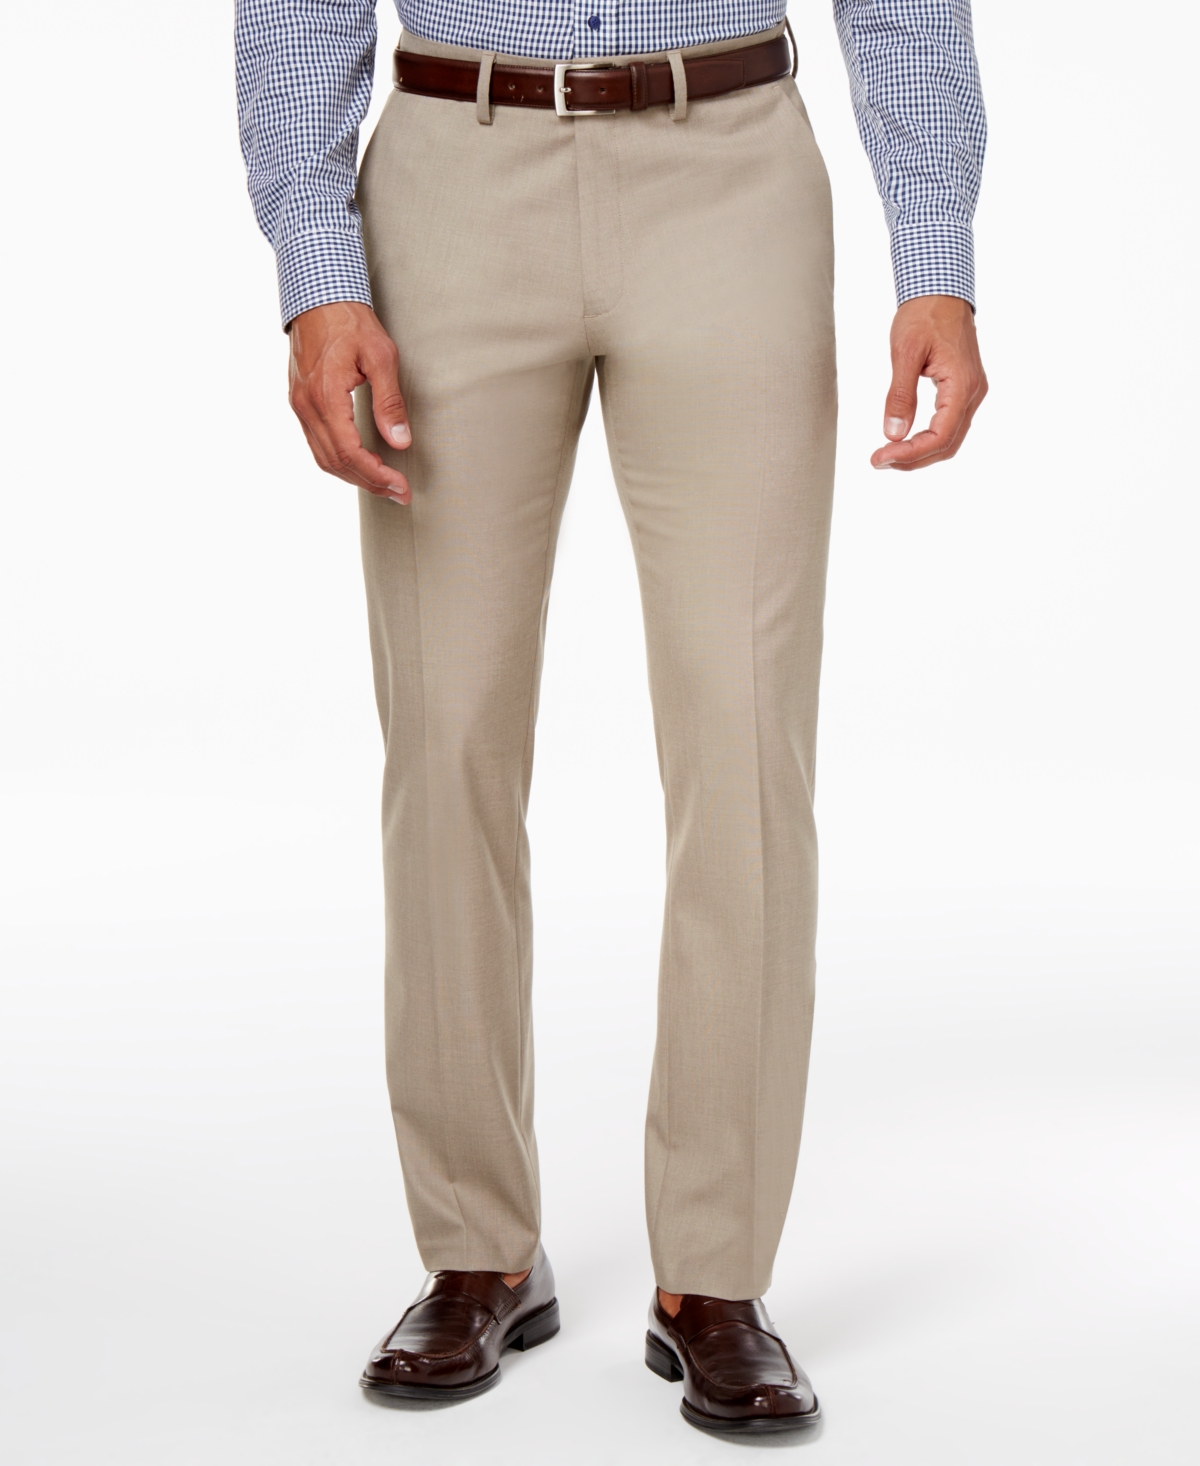 Men's Slim-Fit Stretch Dress Pants, Created for Macy's - Light Grey